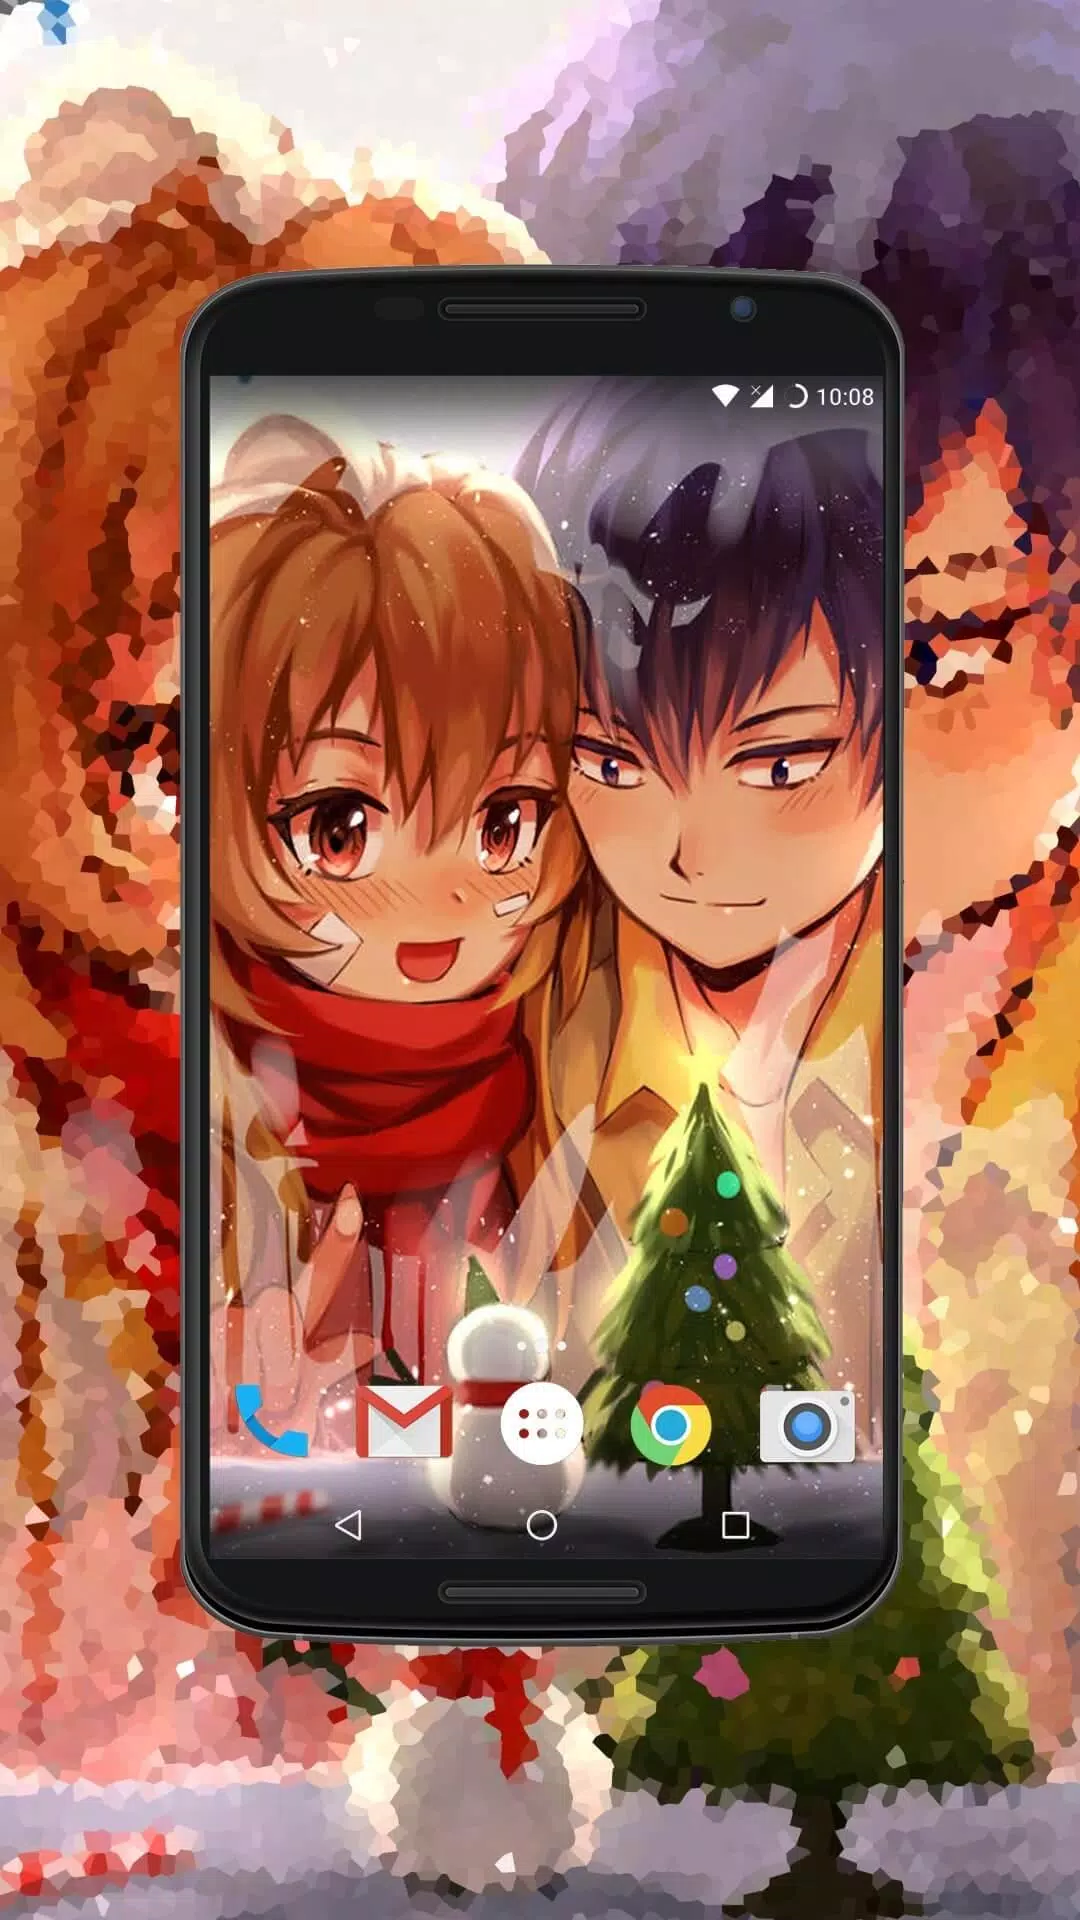 Download Best friends Taiga and Ryuuji from the anime series Toradora  Wallpaper